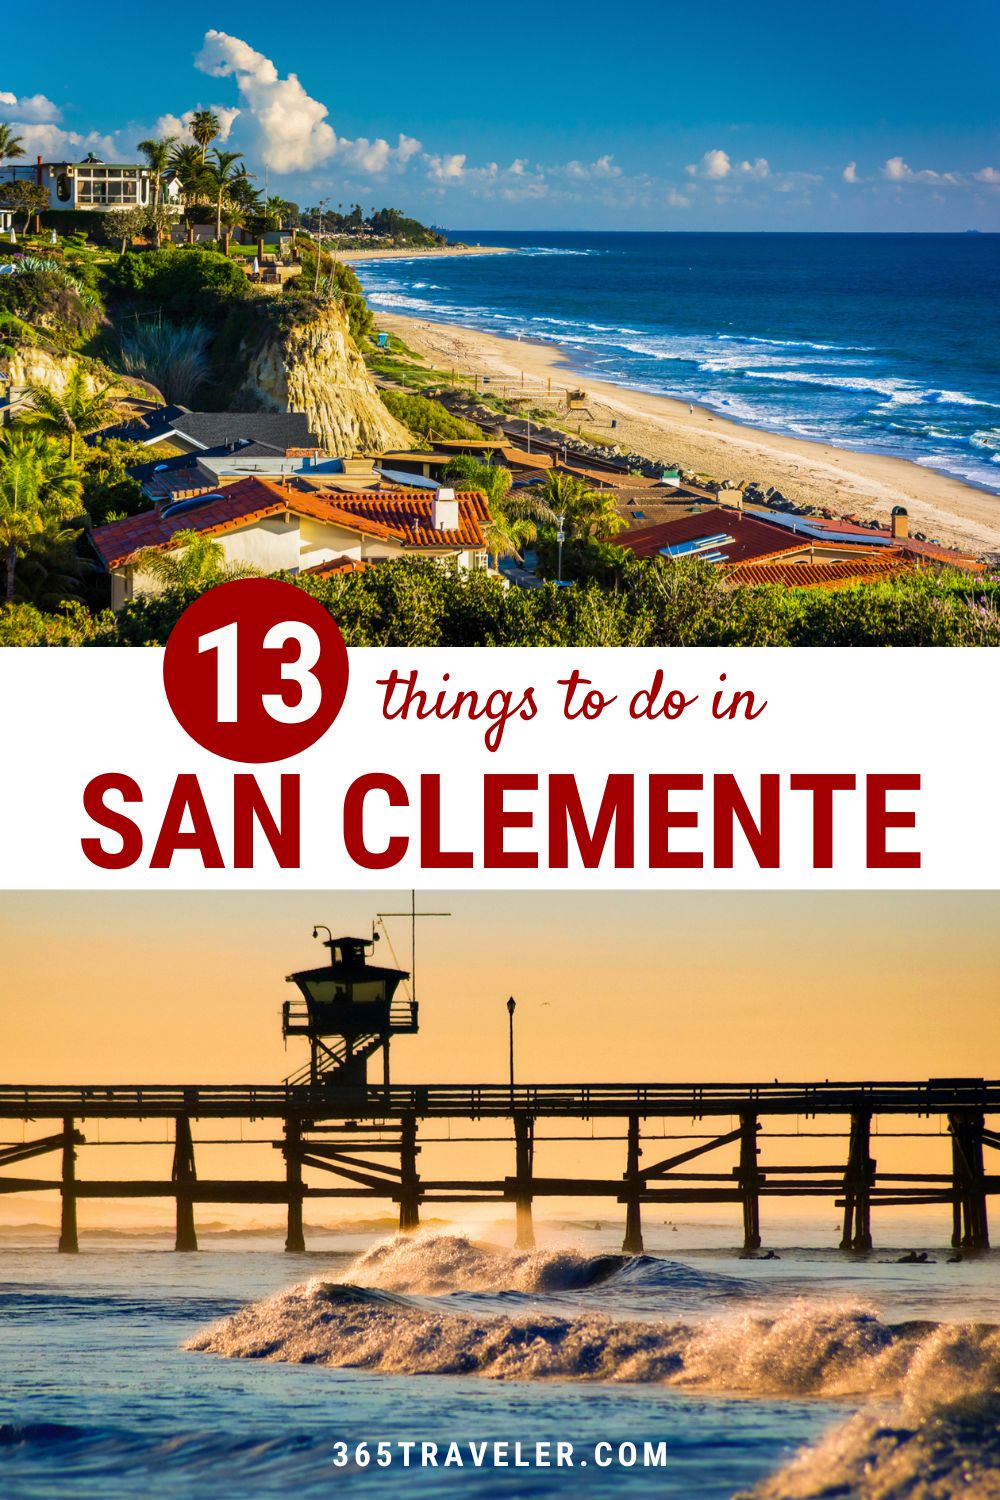 13 SPECTACULAR THINGS TO DO IN SAN CLEMENTE, CA